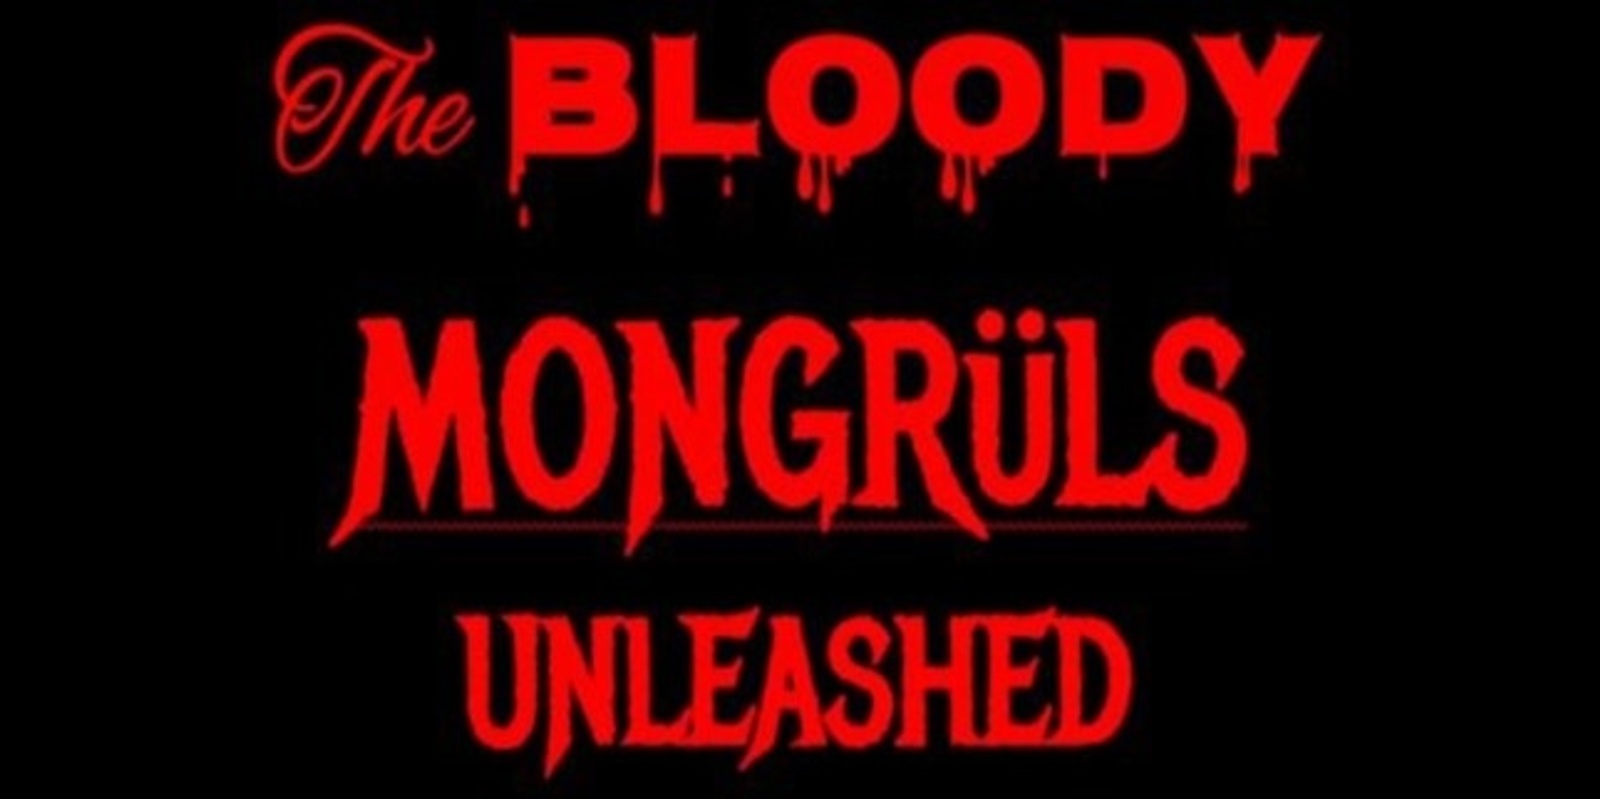 Banner image for The Bloody Mongrüls Unleashed